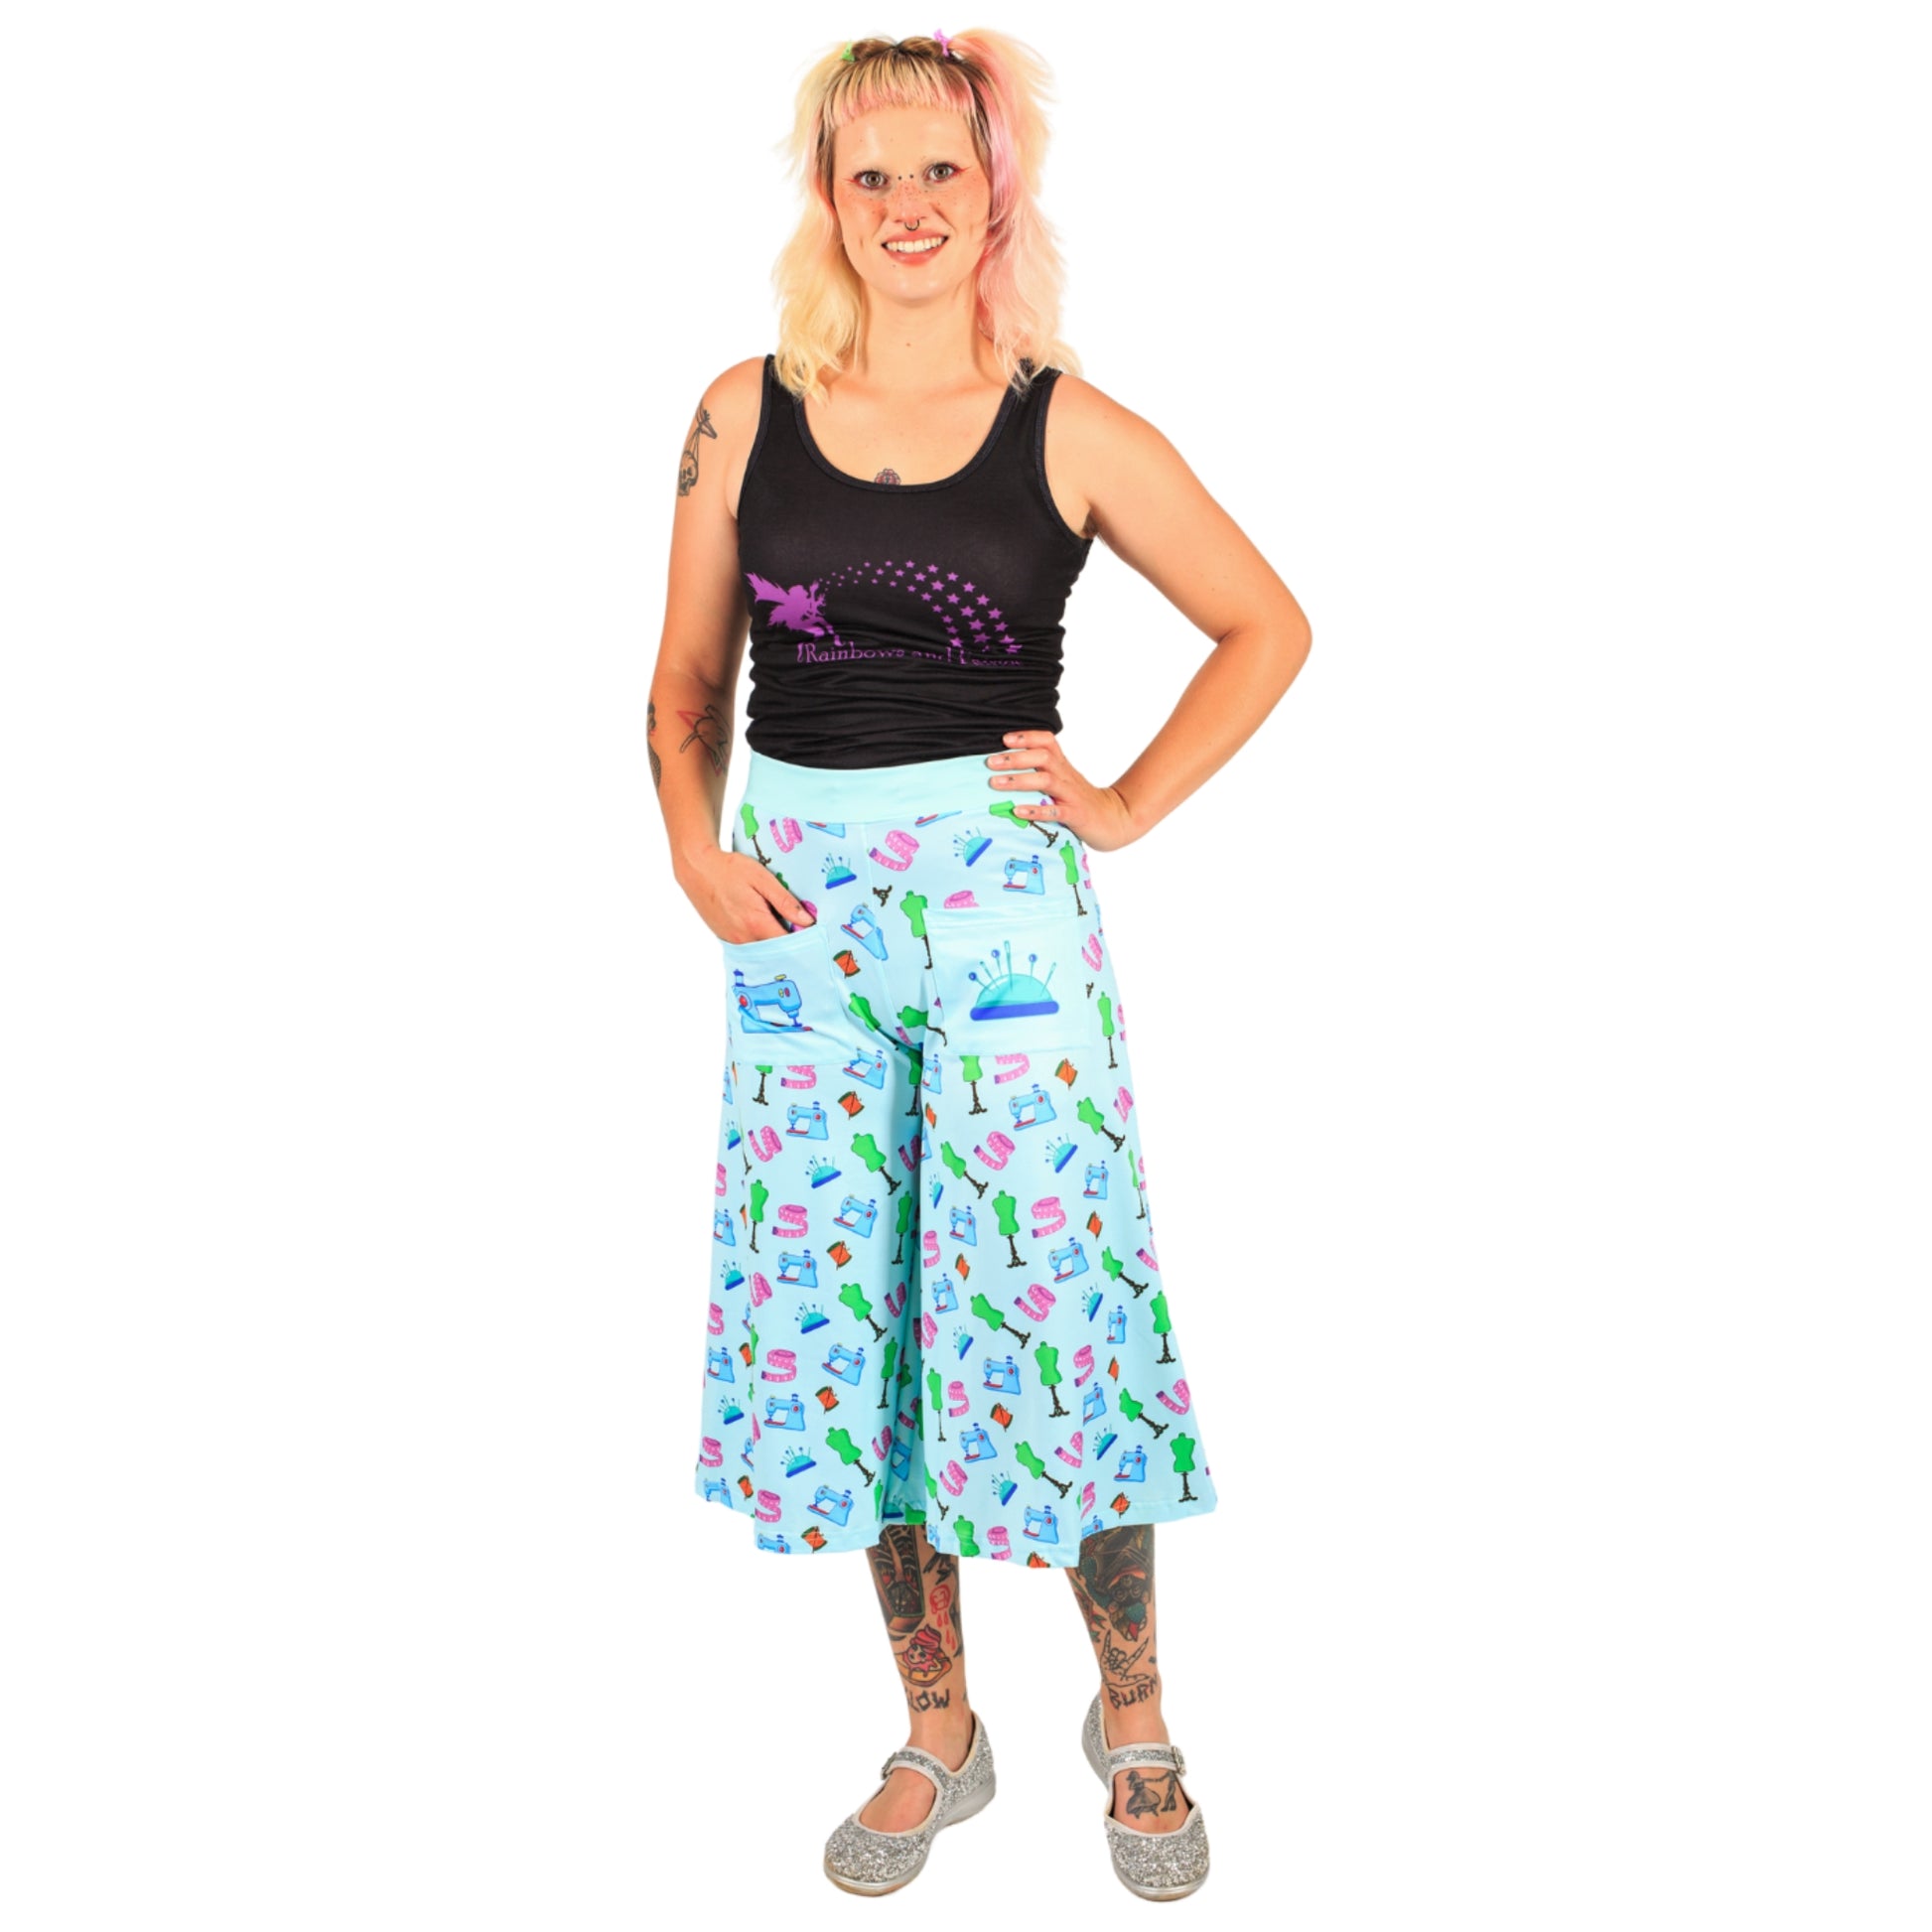 Haberdashery Culottes by RainbowsAndFairies.com (Sewing - Dressmaking - 3 Quarter Pants - Rockabilly - Vintage Inspired) - SKU: CL_CULTS_HABER_ORG - Pic 03